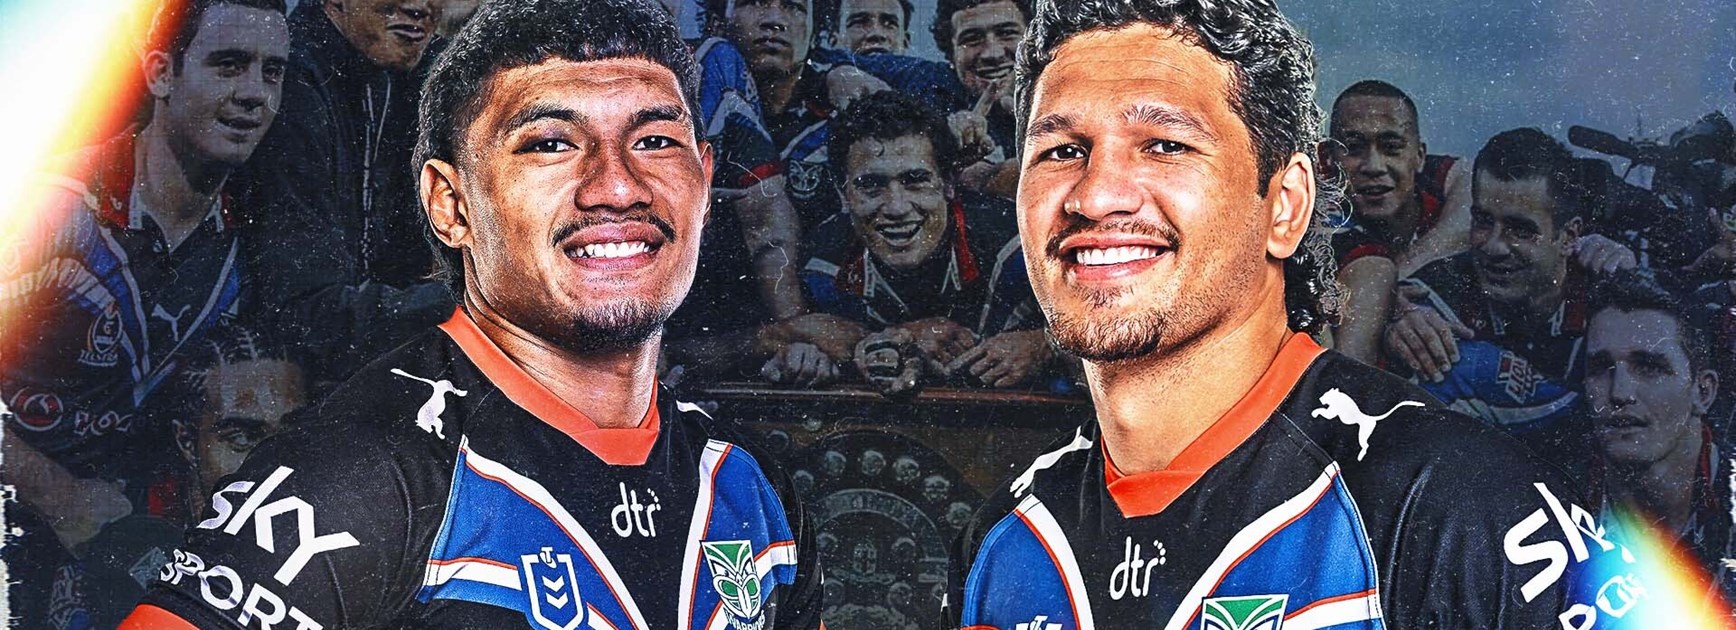 Vodafone Warriors provide eight players for All-Stars match